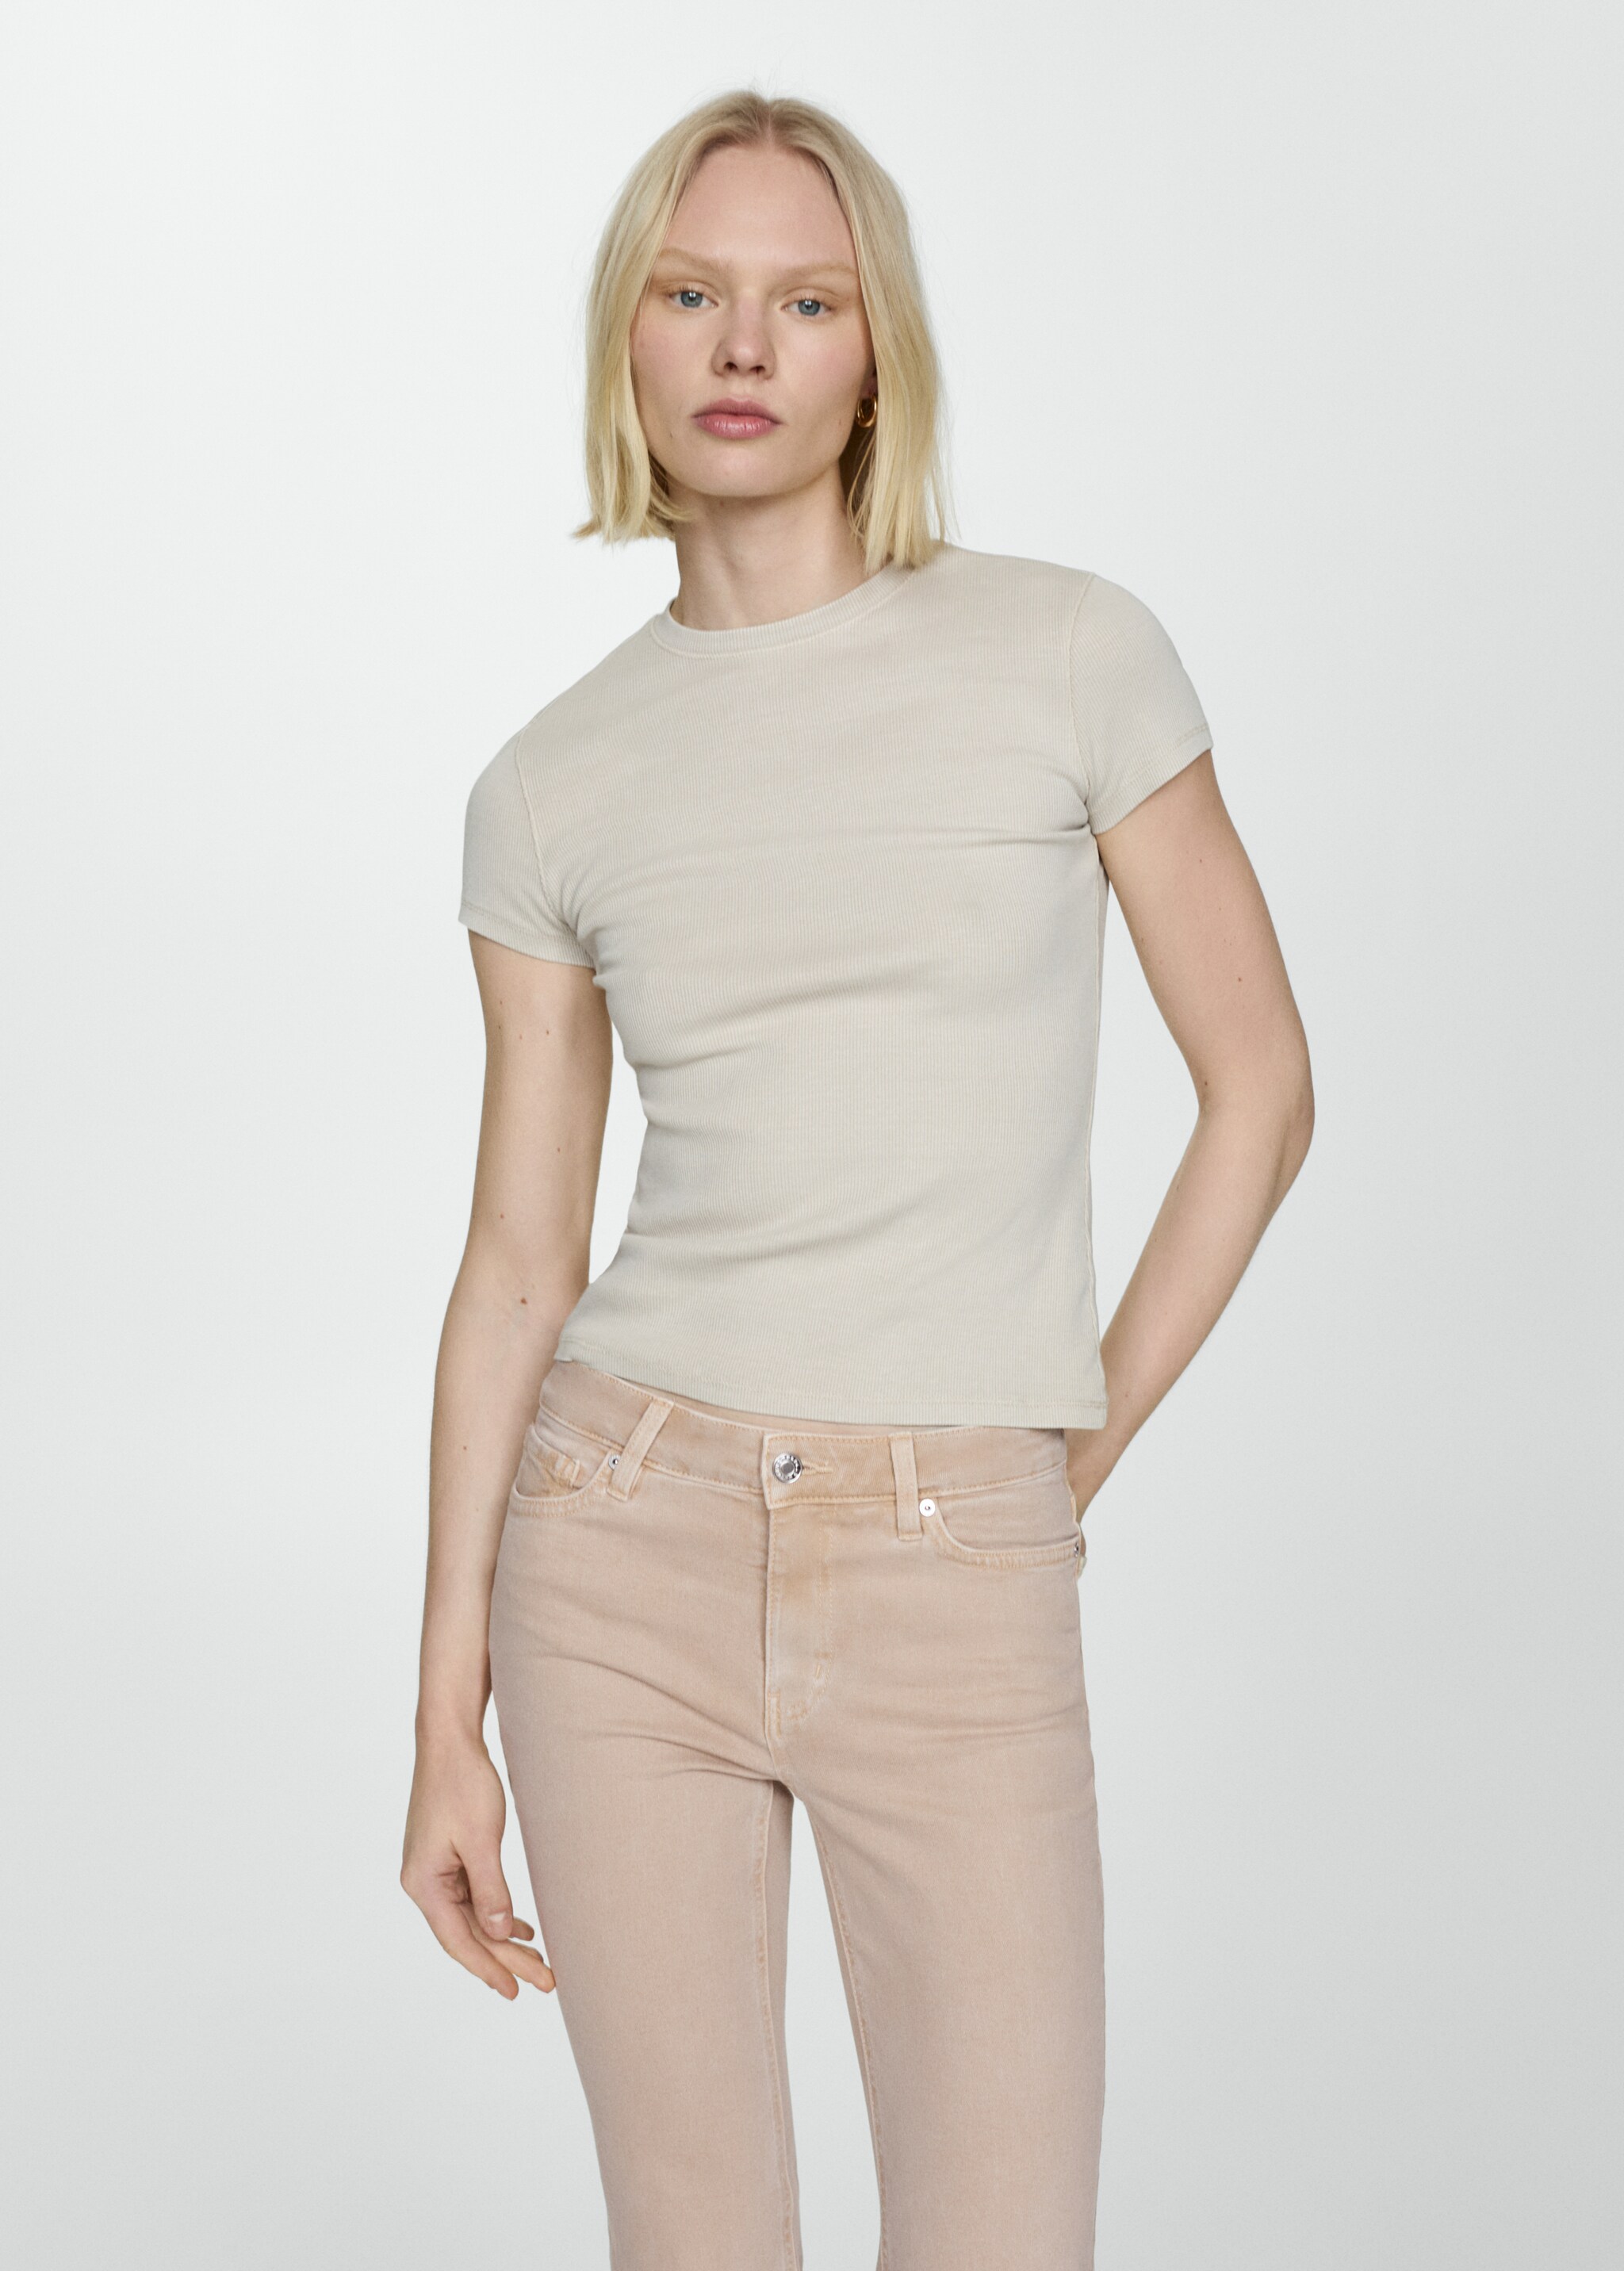 Jeans Sienna flare crop - Details of the article 2